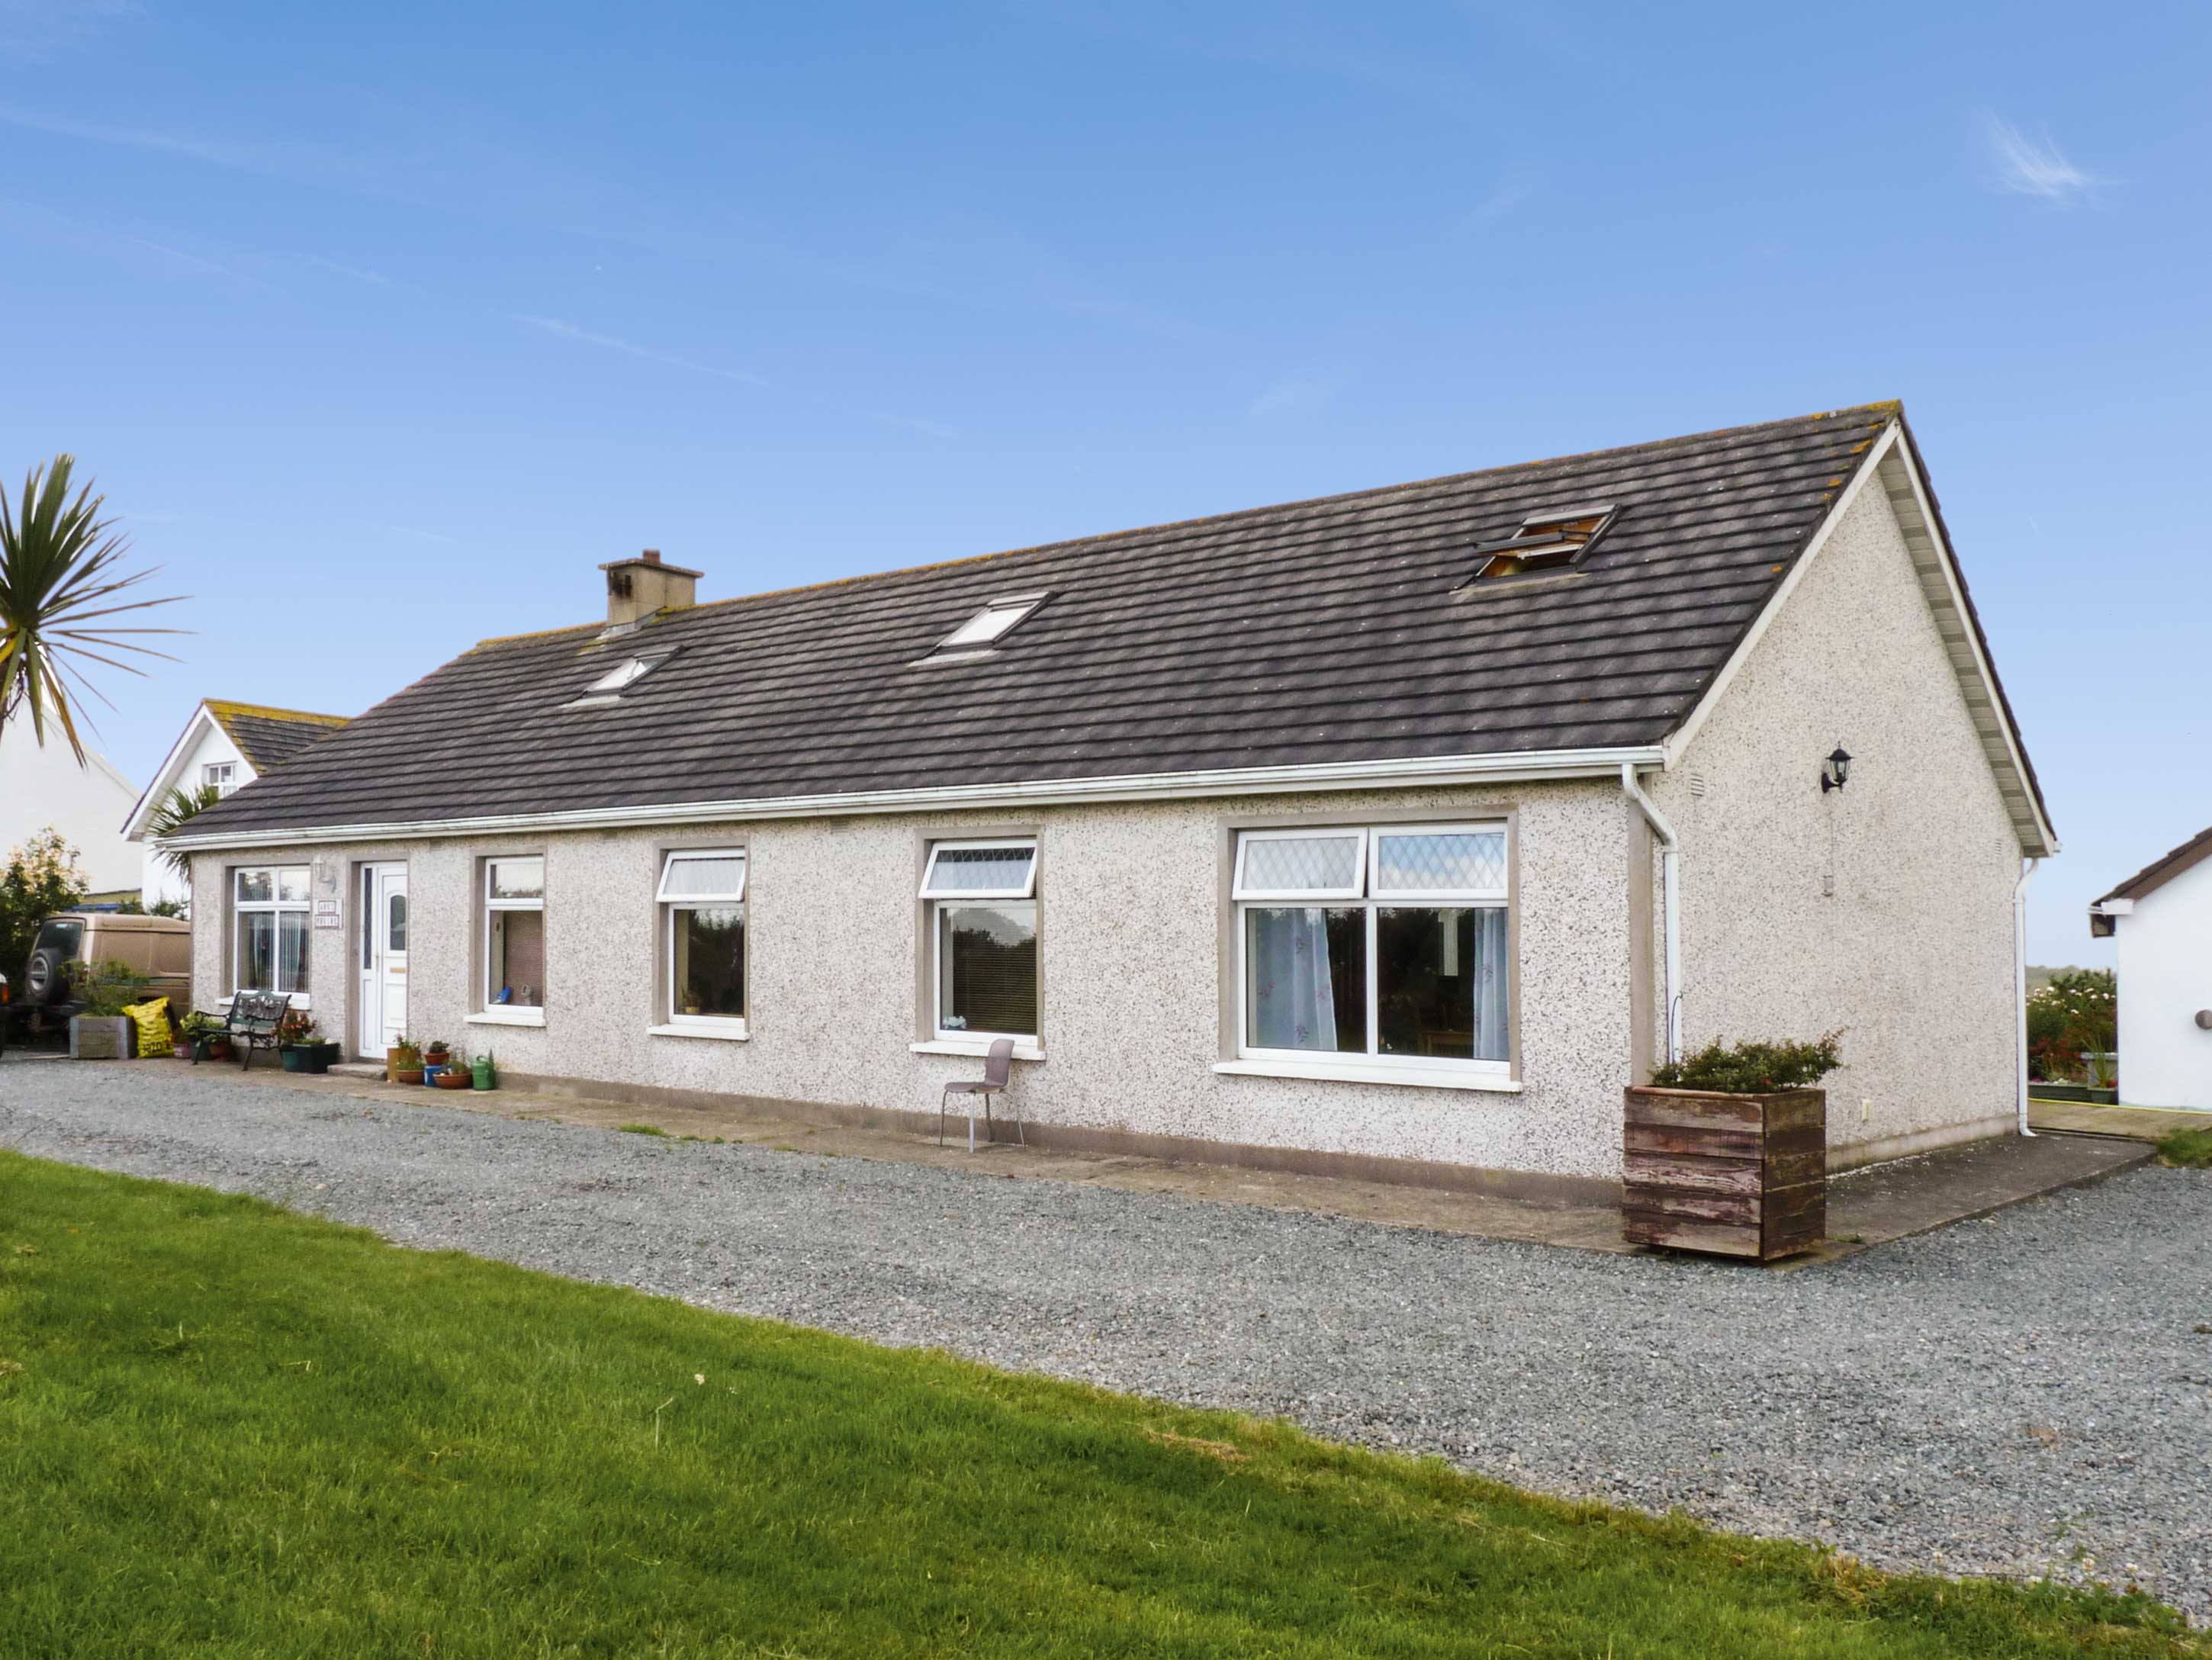 Aras Mhuire - Fethard | Reviews and Information